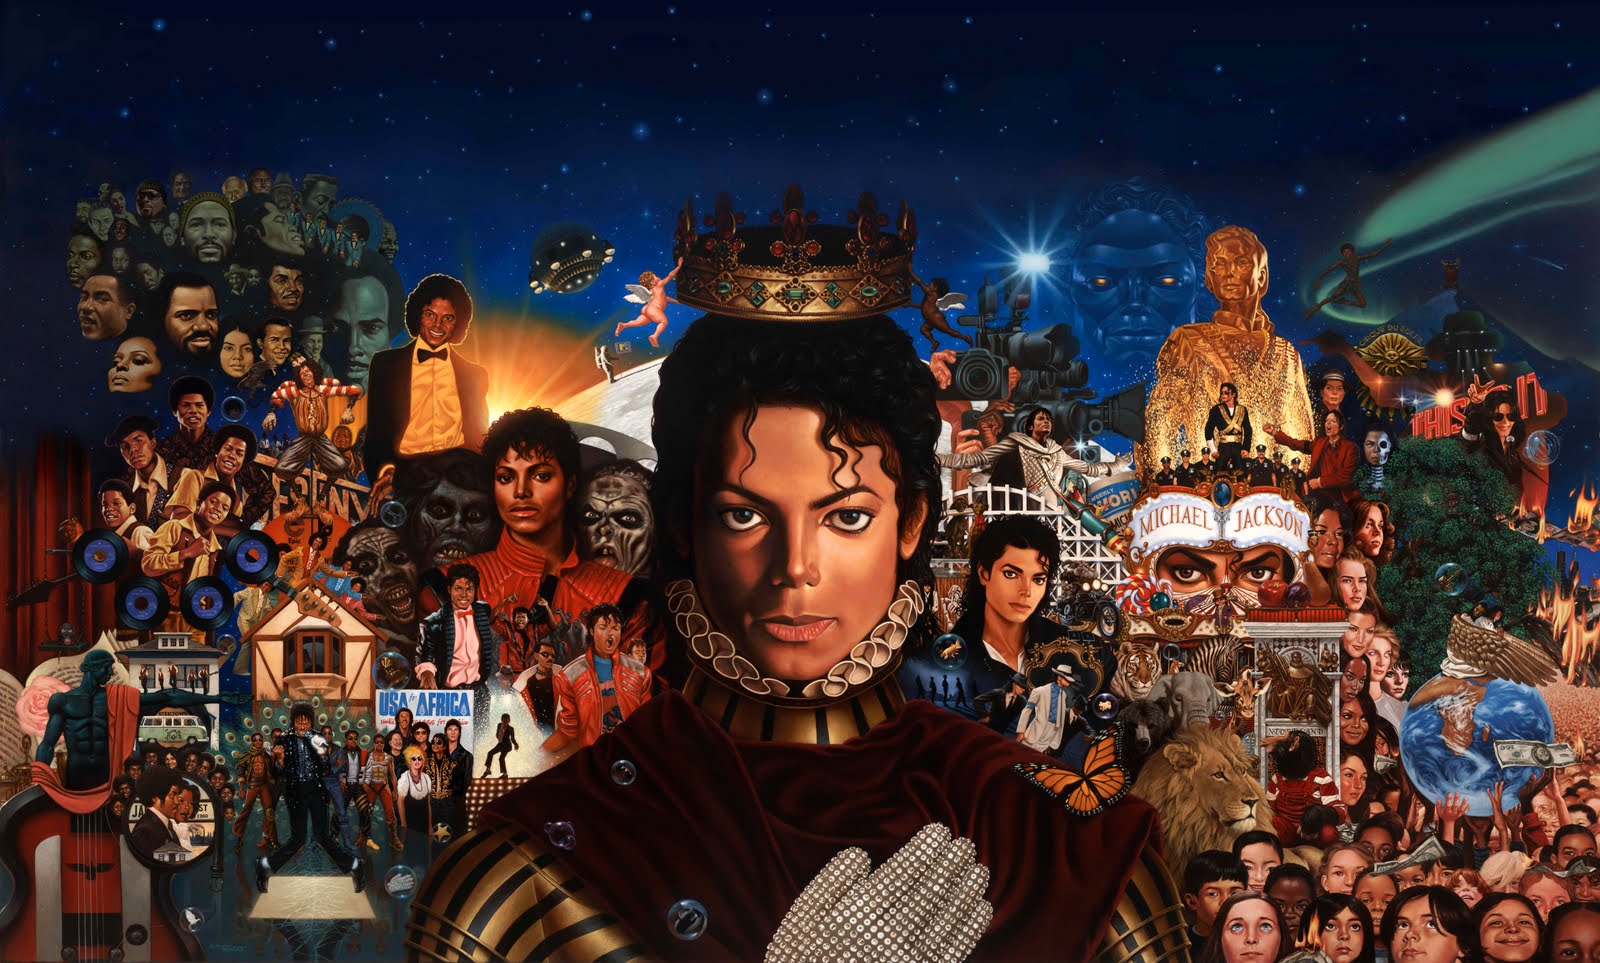 Michael the album all mj's albums in one picture